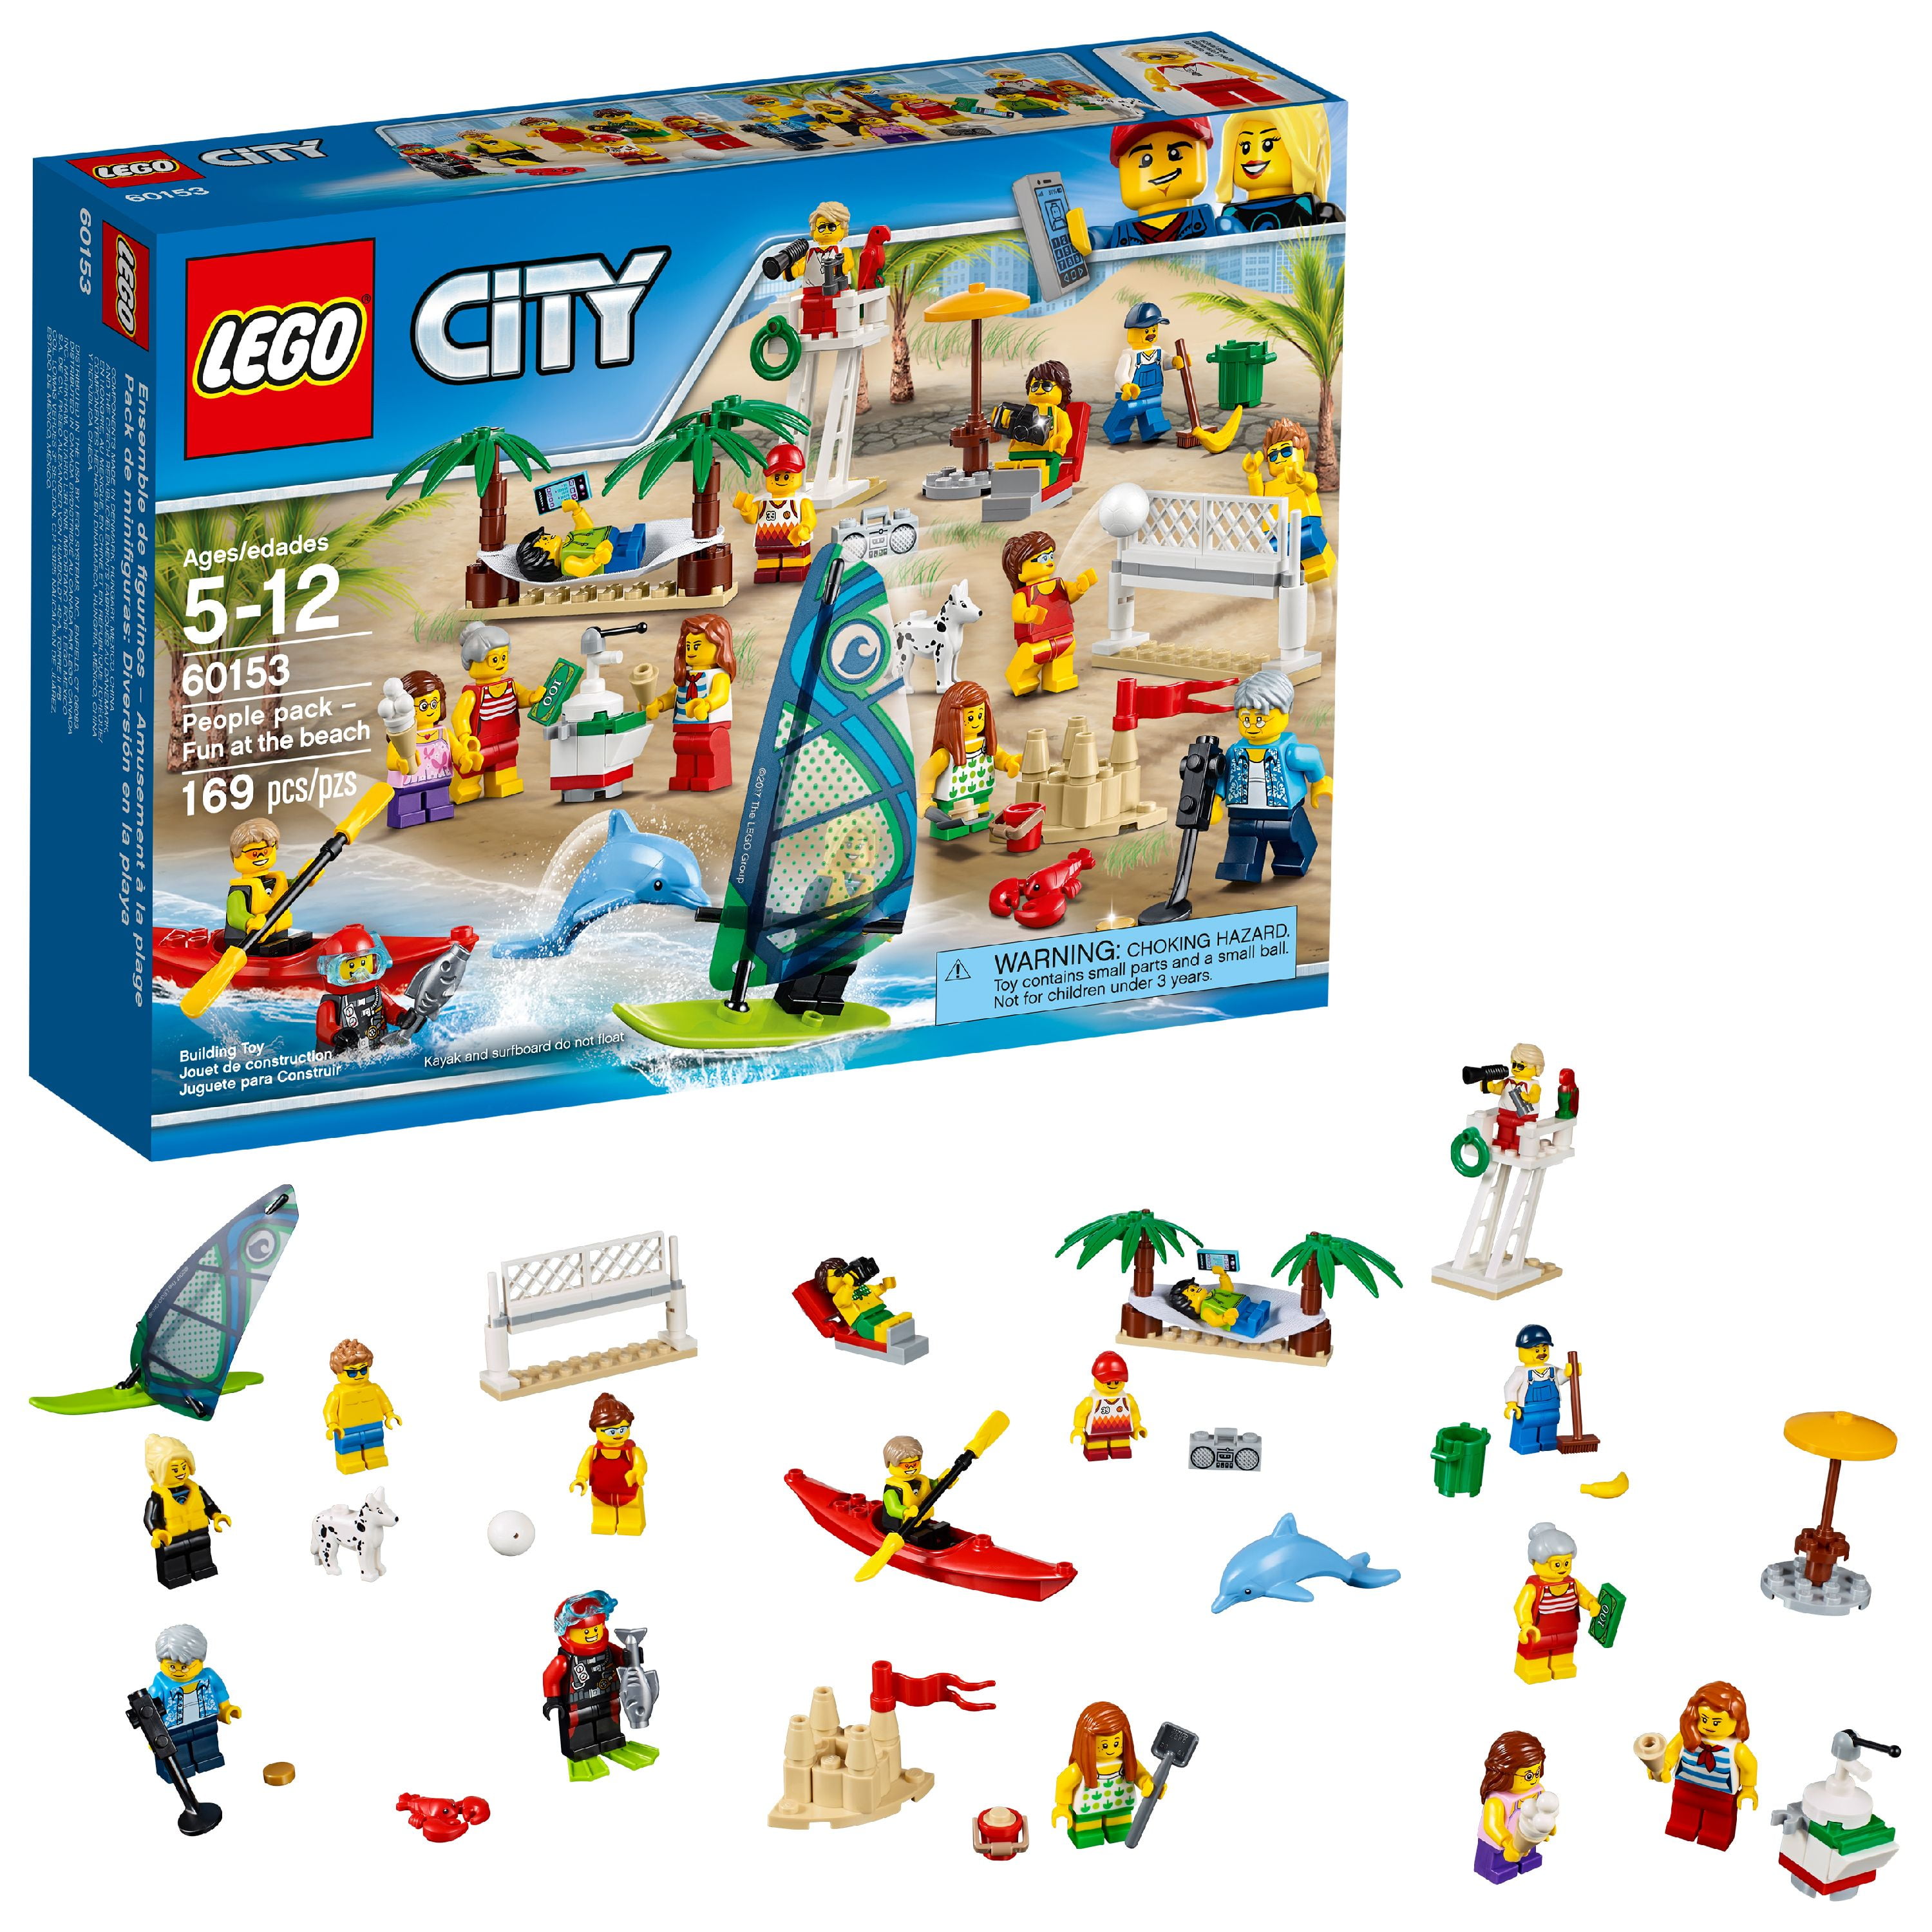 Lego City Town 60153 People Pack Fun At The Beach Construction dolphin dog NISB 